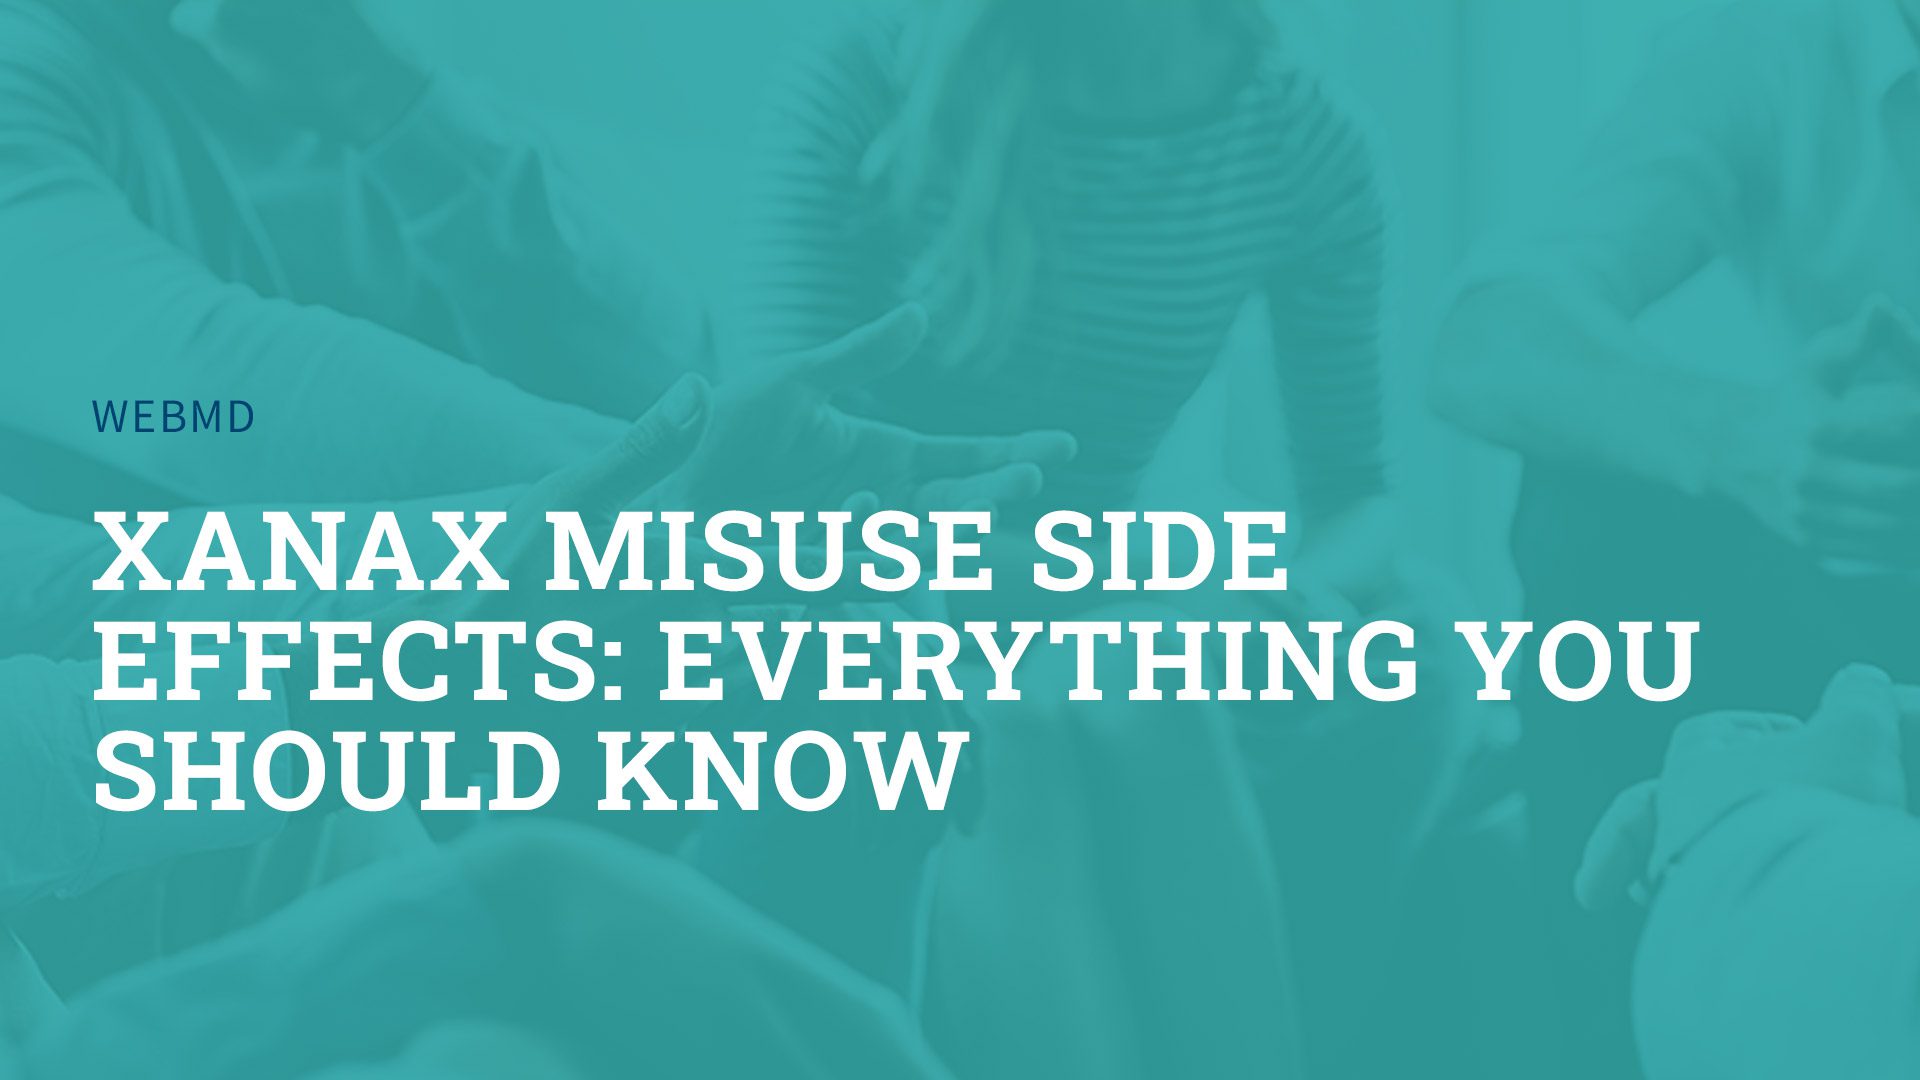 Xanax Misuse Side Effects: Everything You Should Know